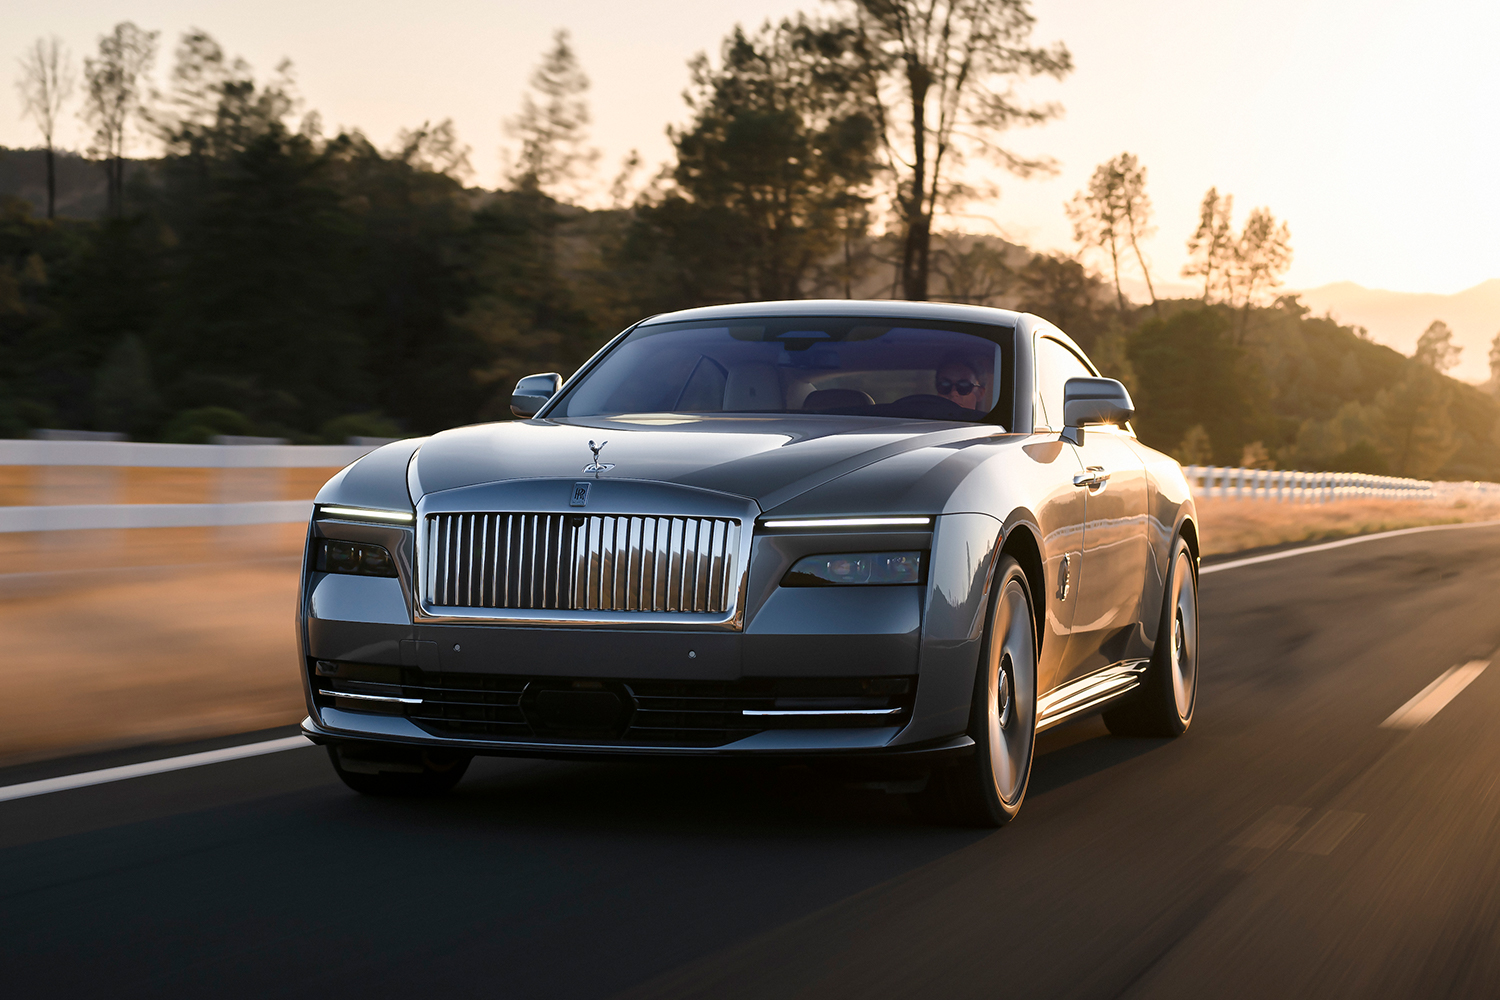 2023 Rolls-Royce Phantom: Specs, Prices, Ratings, and Reviews